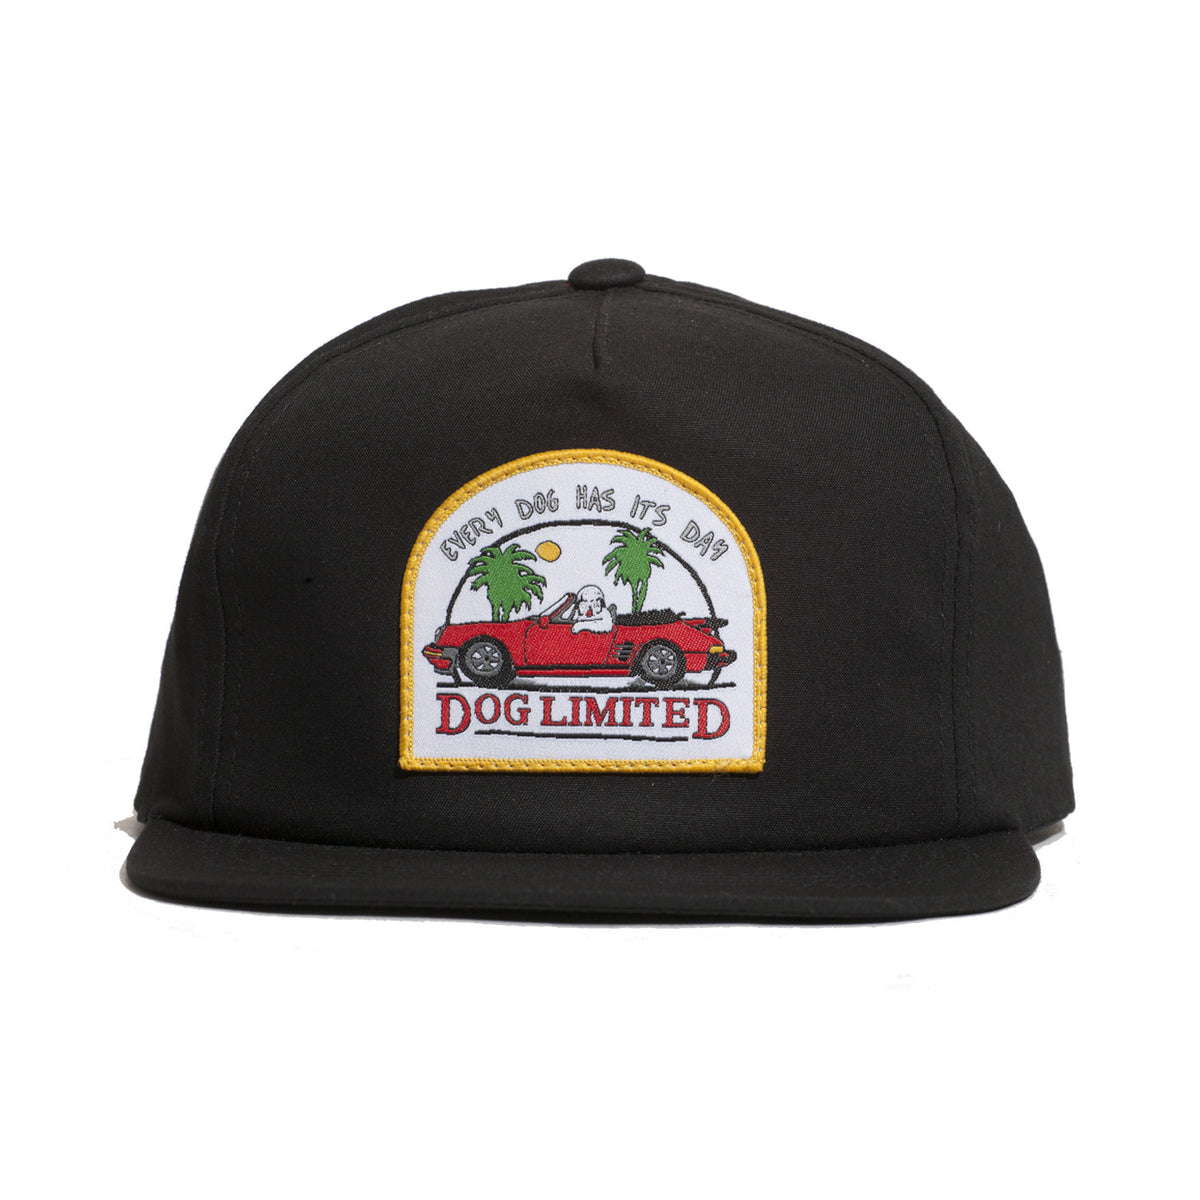 Every Dog Has Its Day Snapback